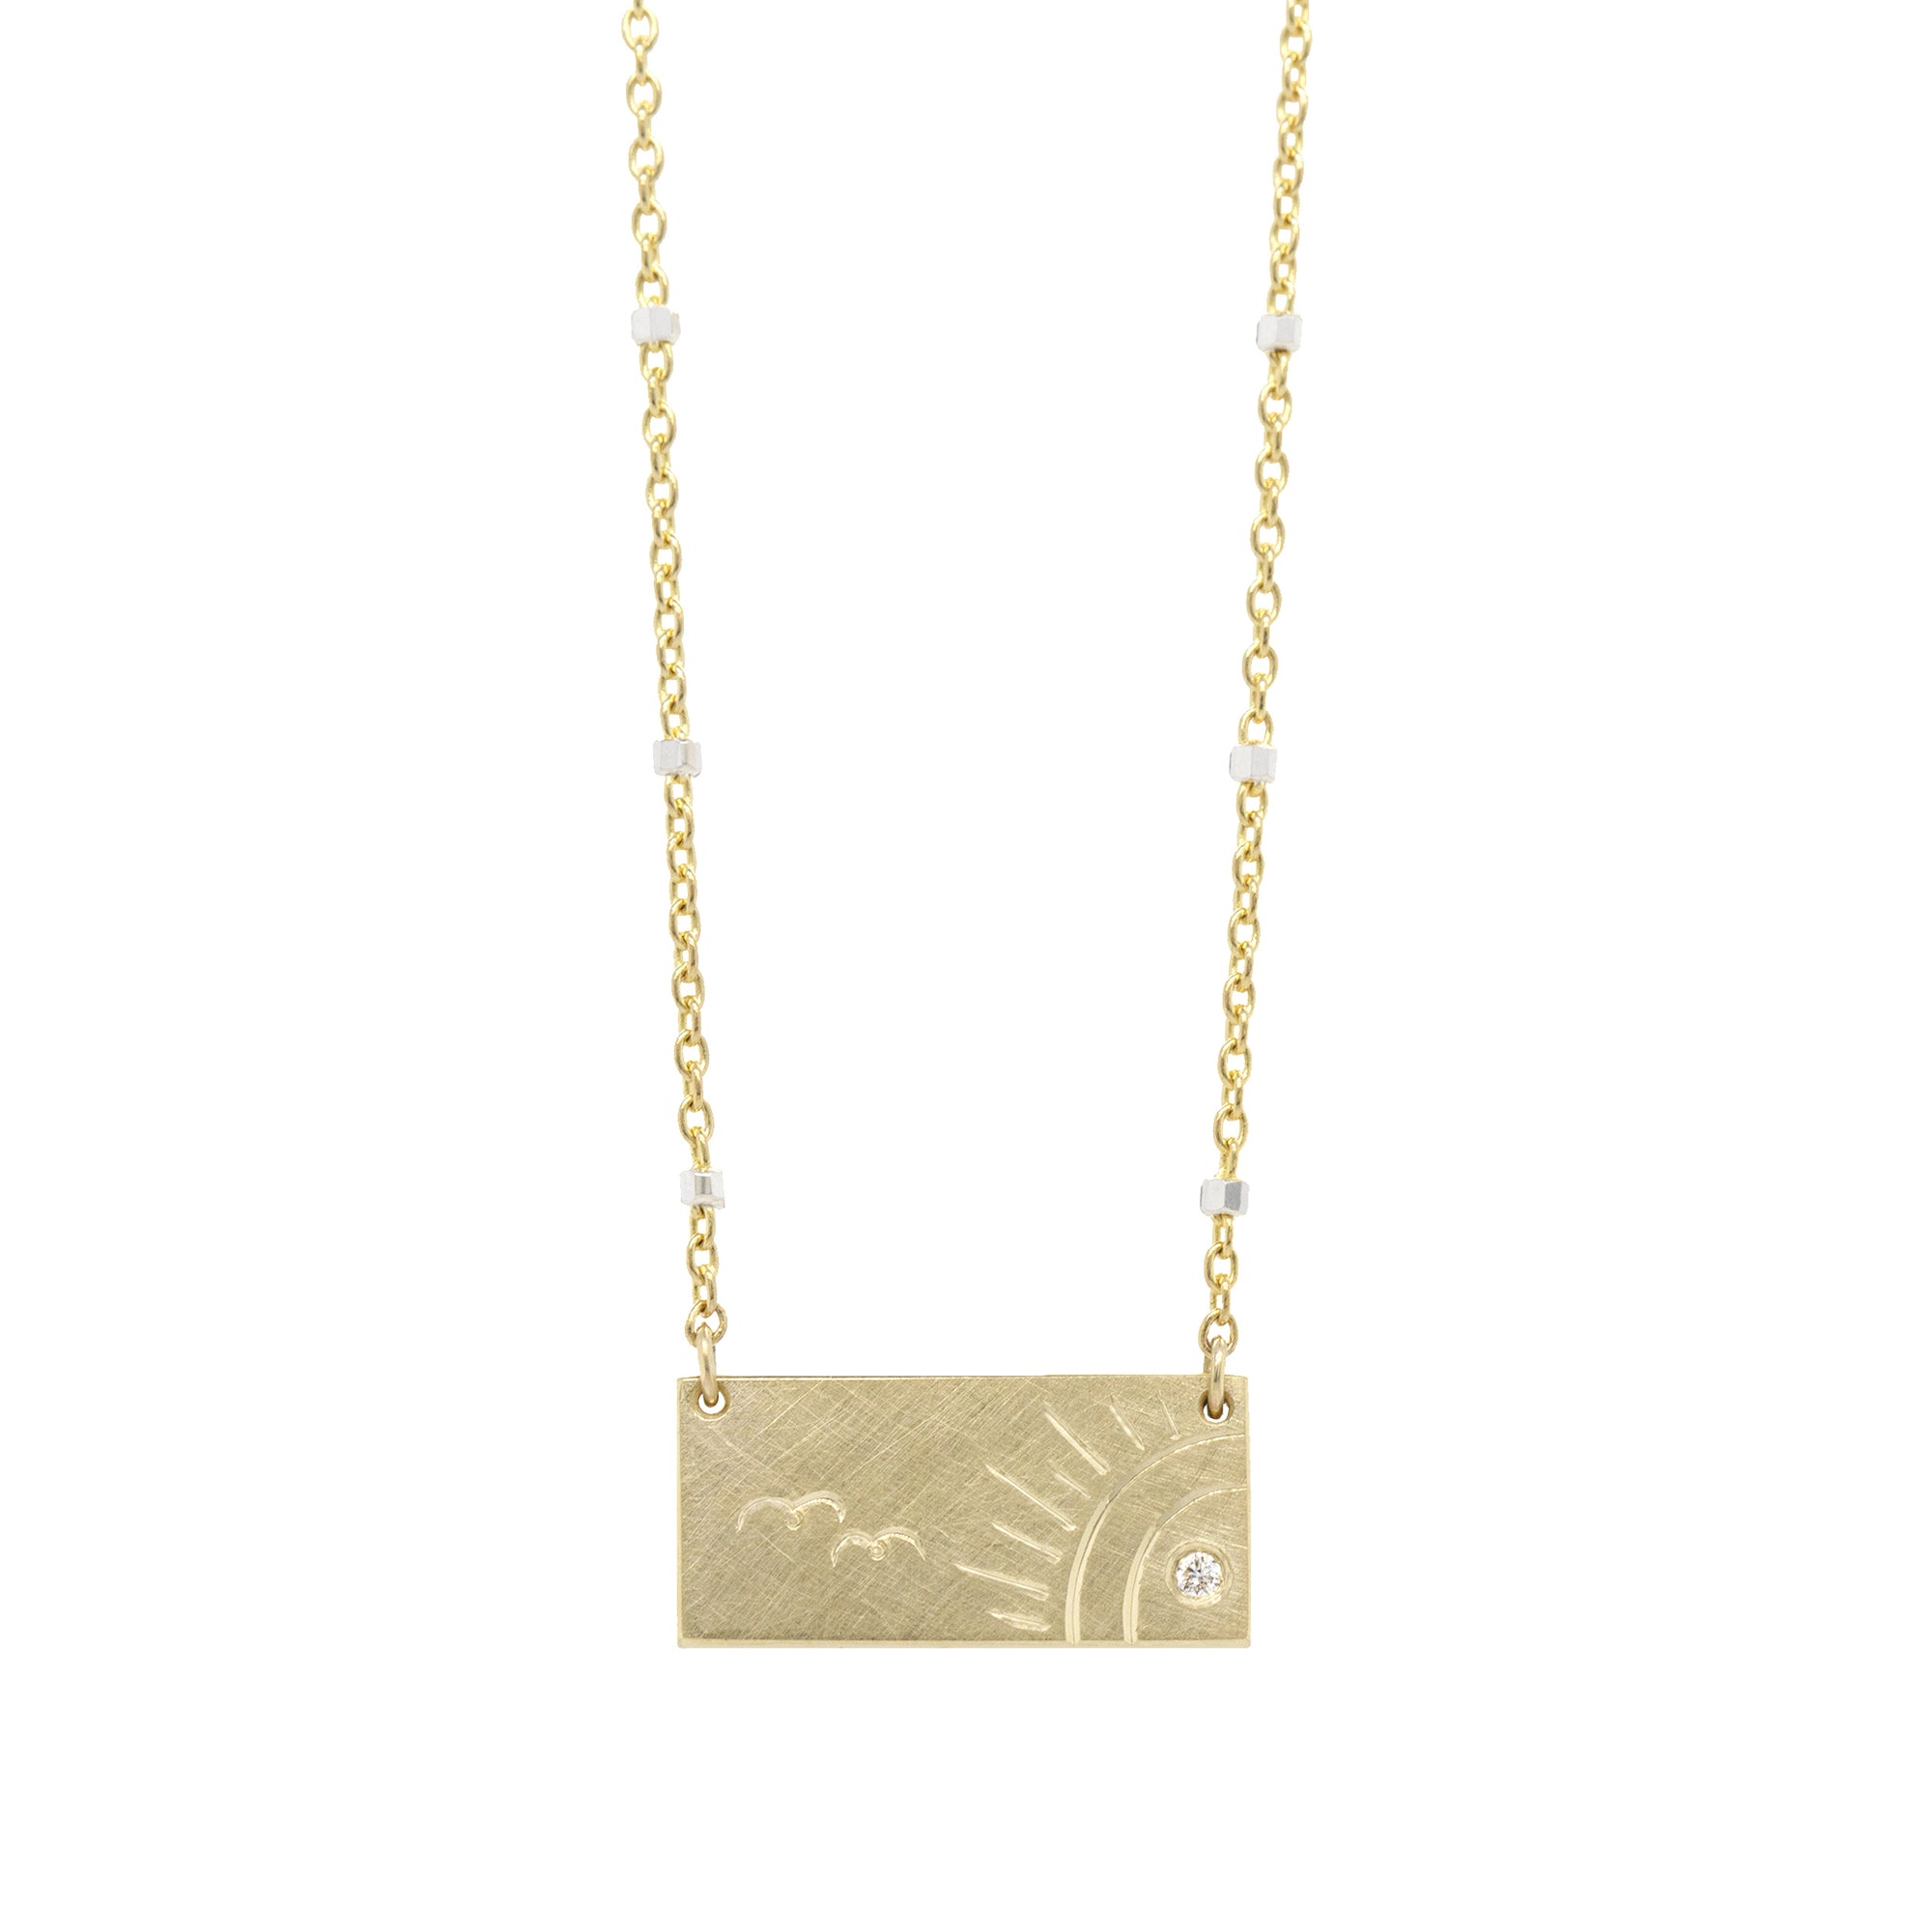 COCO 14k Gold Bar Necklace